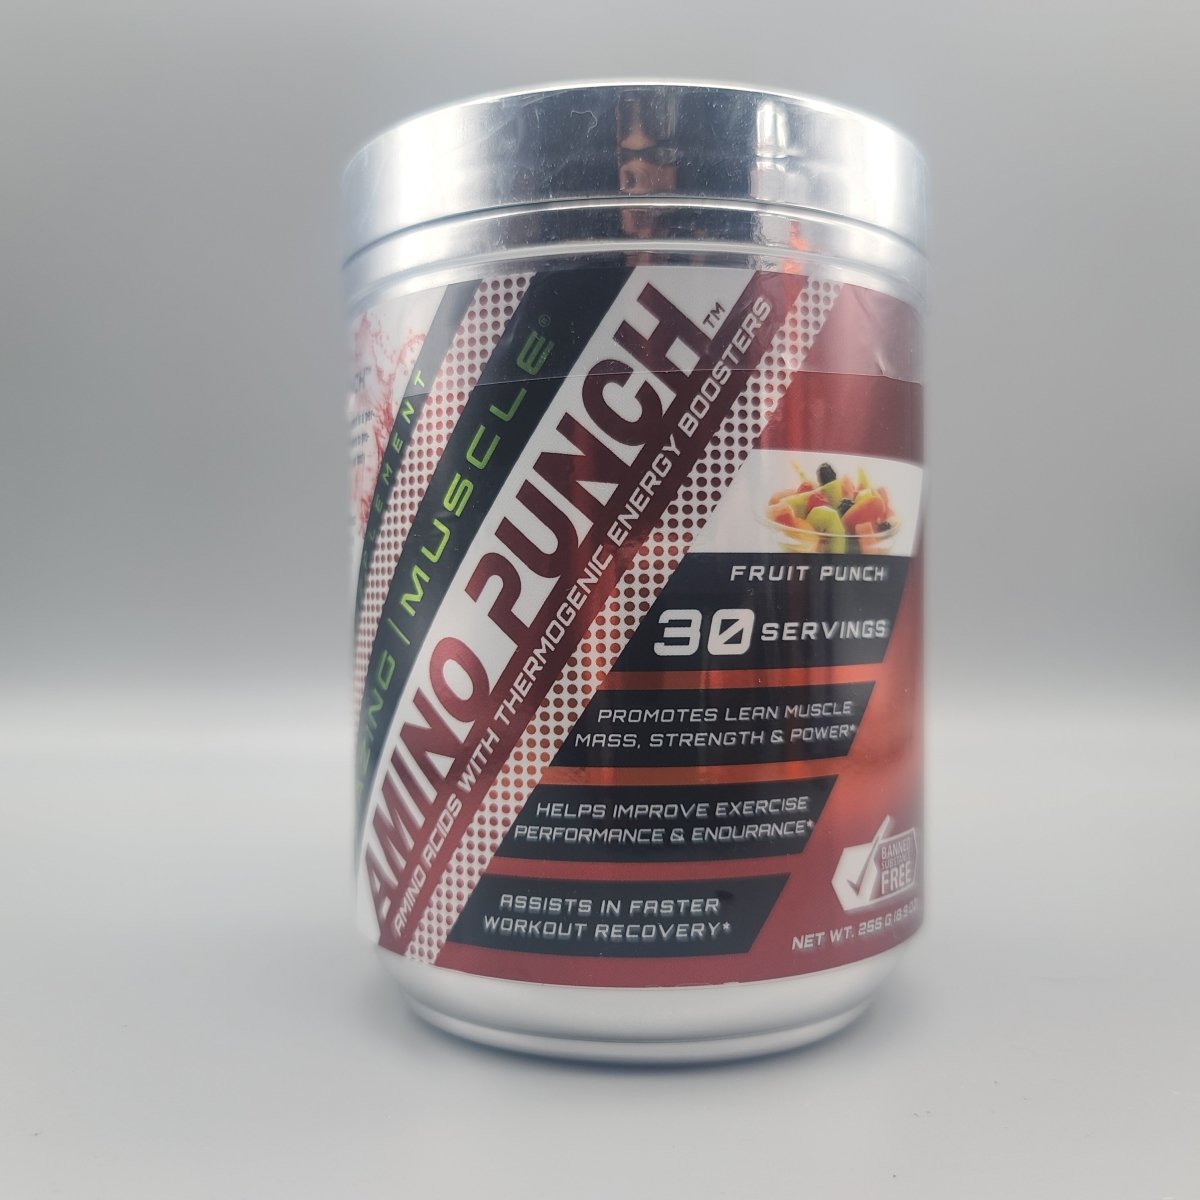 Amazing Muscle- Amino Punch-Fruit Punch-30 Servings-255gm